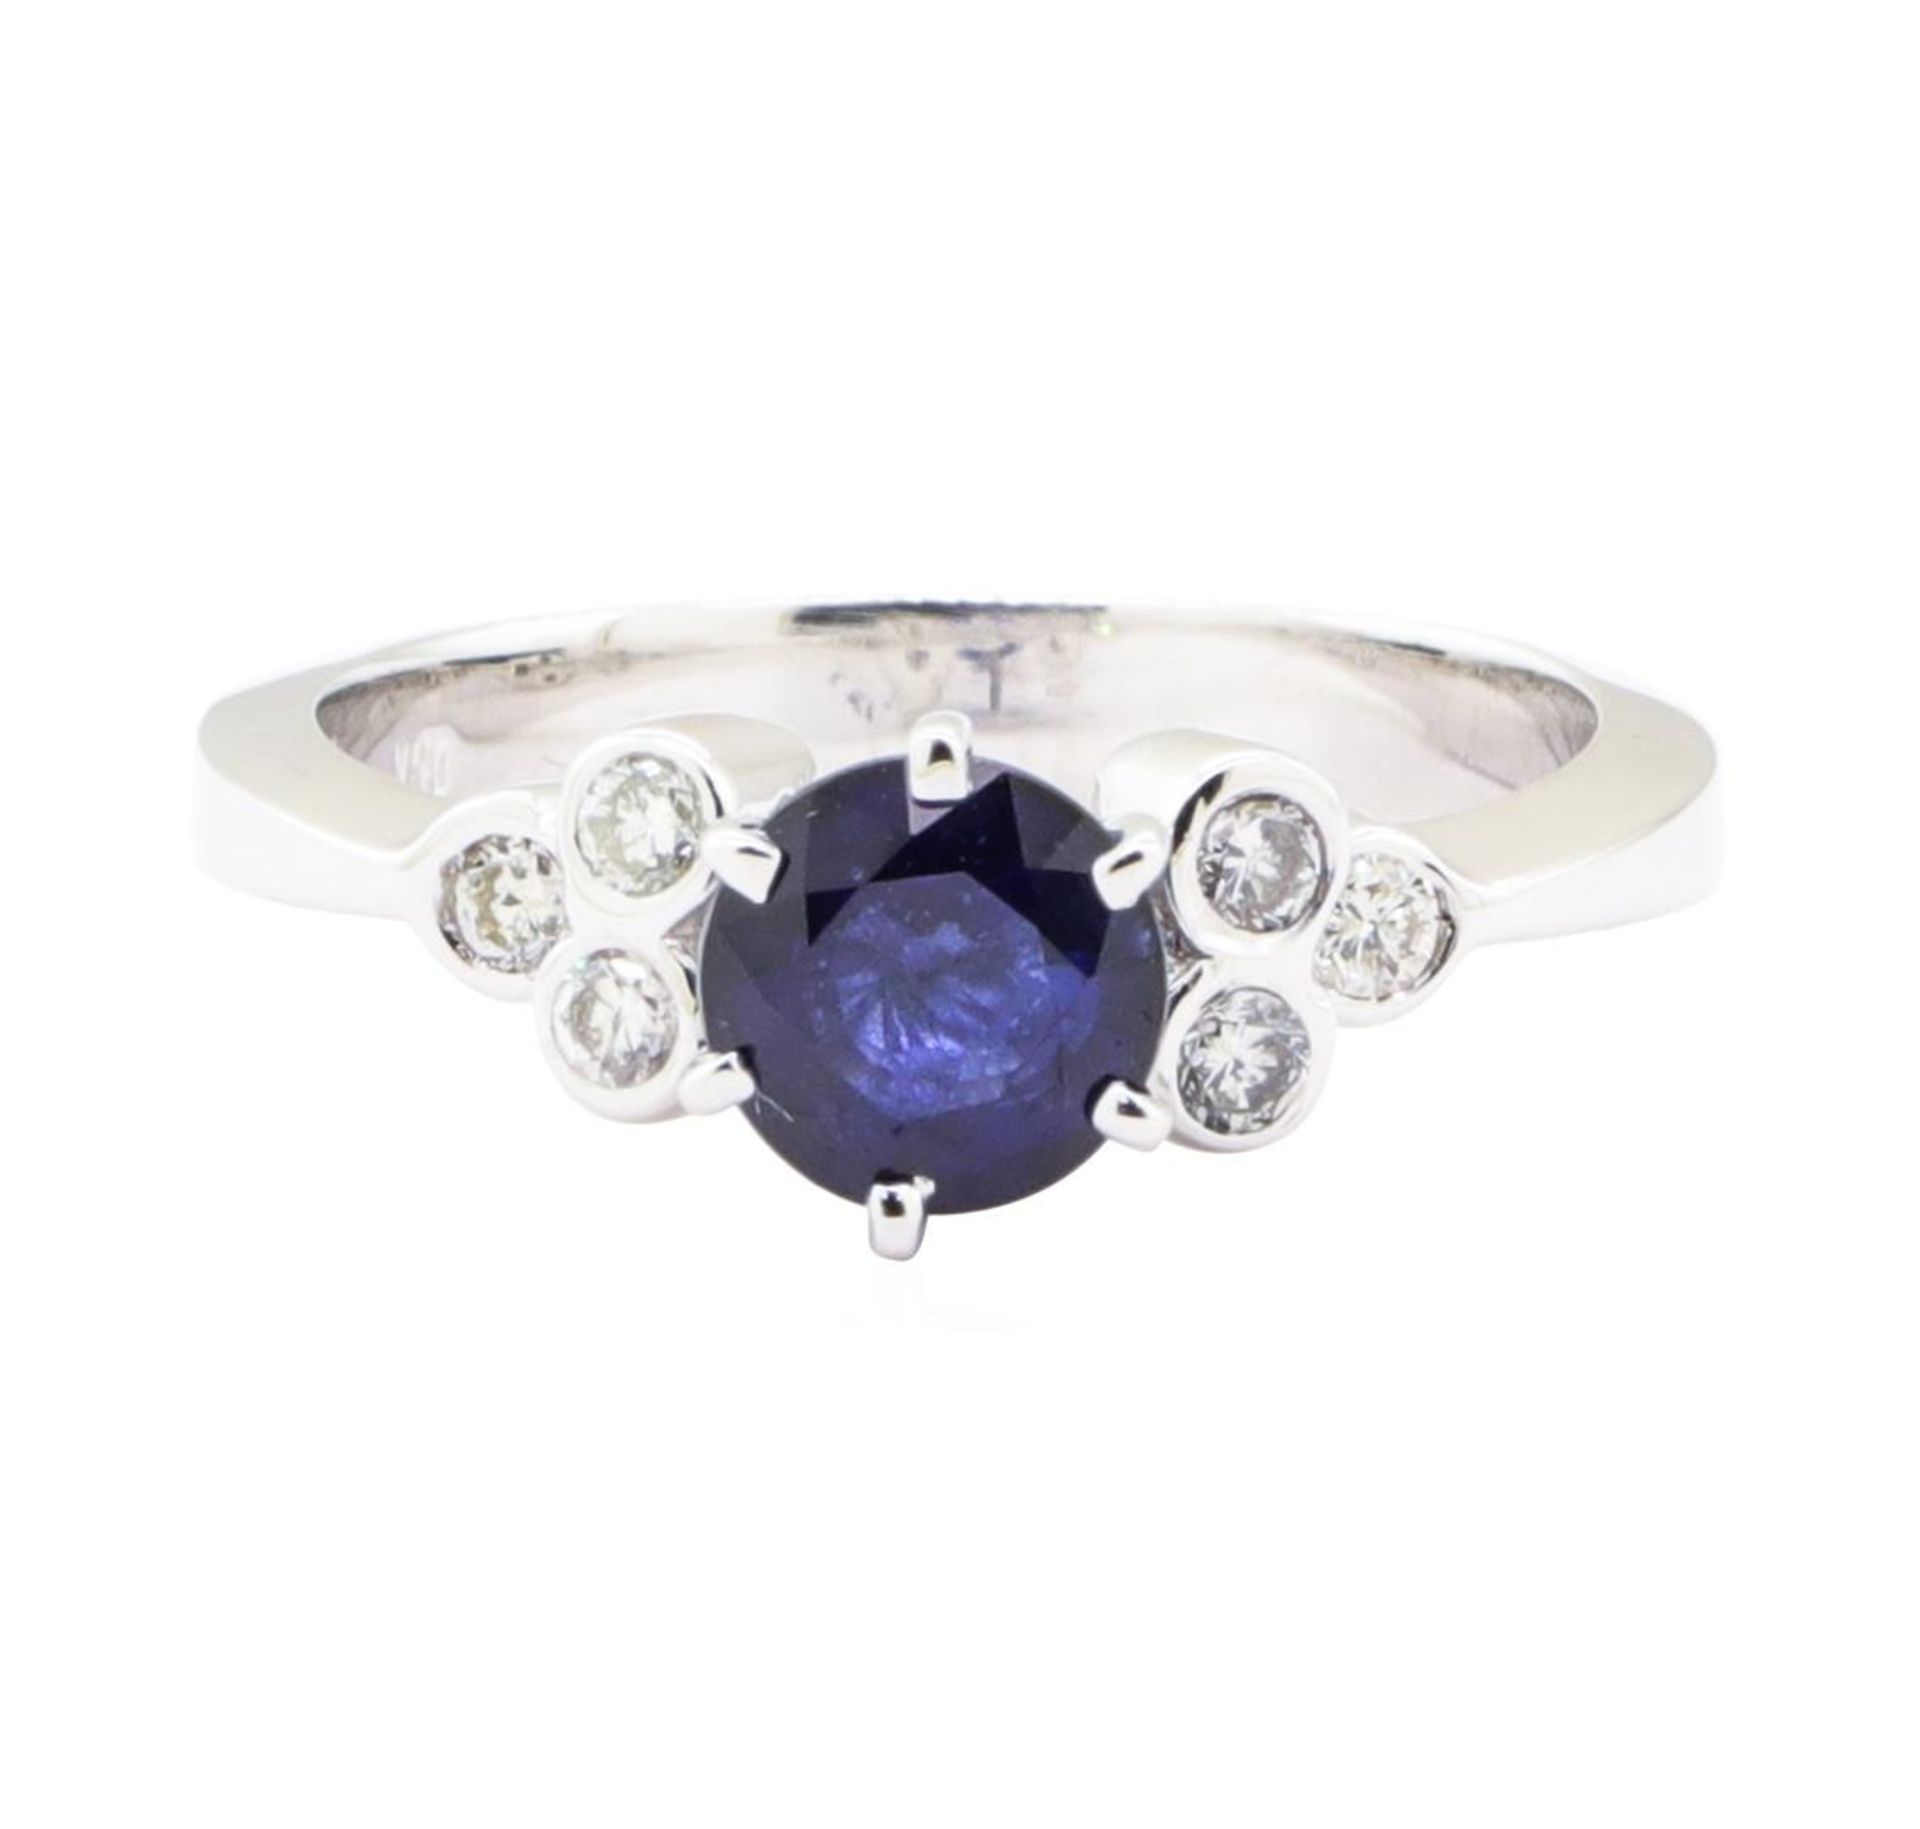 1.44ctw Sapphire and Diamond Ring - 18KT White Gold - Image 2 of 4